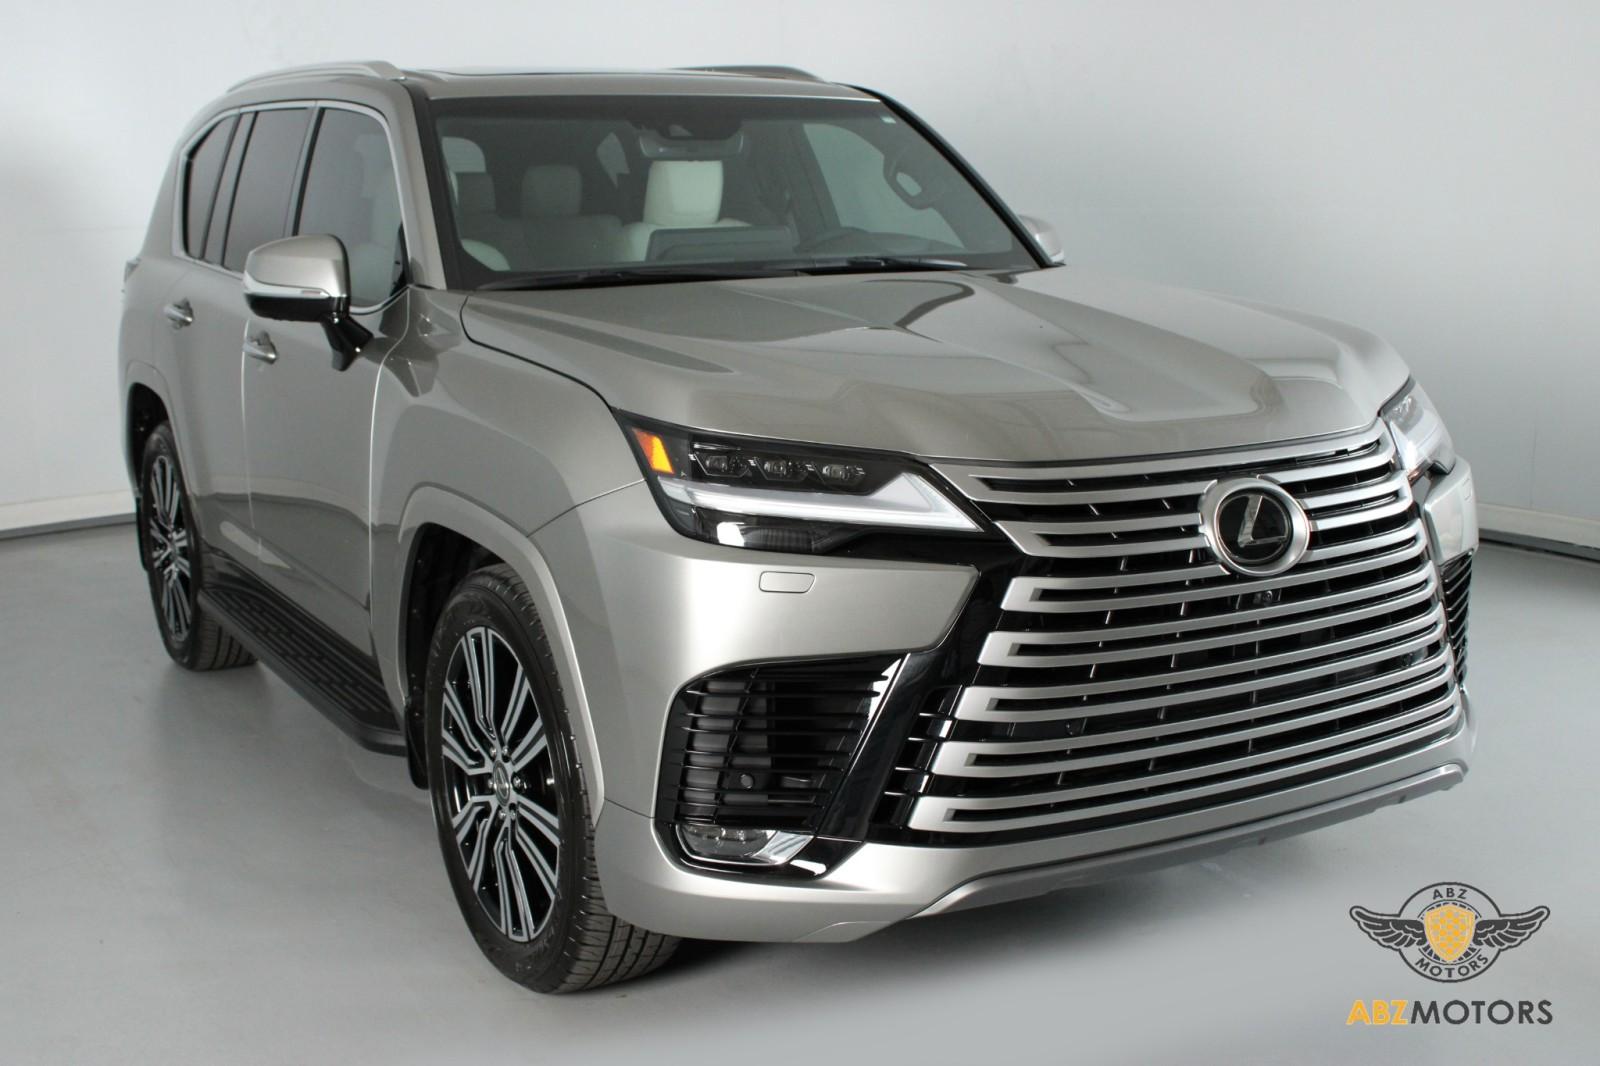 The new Lexus LX600 3.5L V6 7-Seater in Singapore